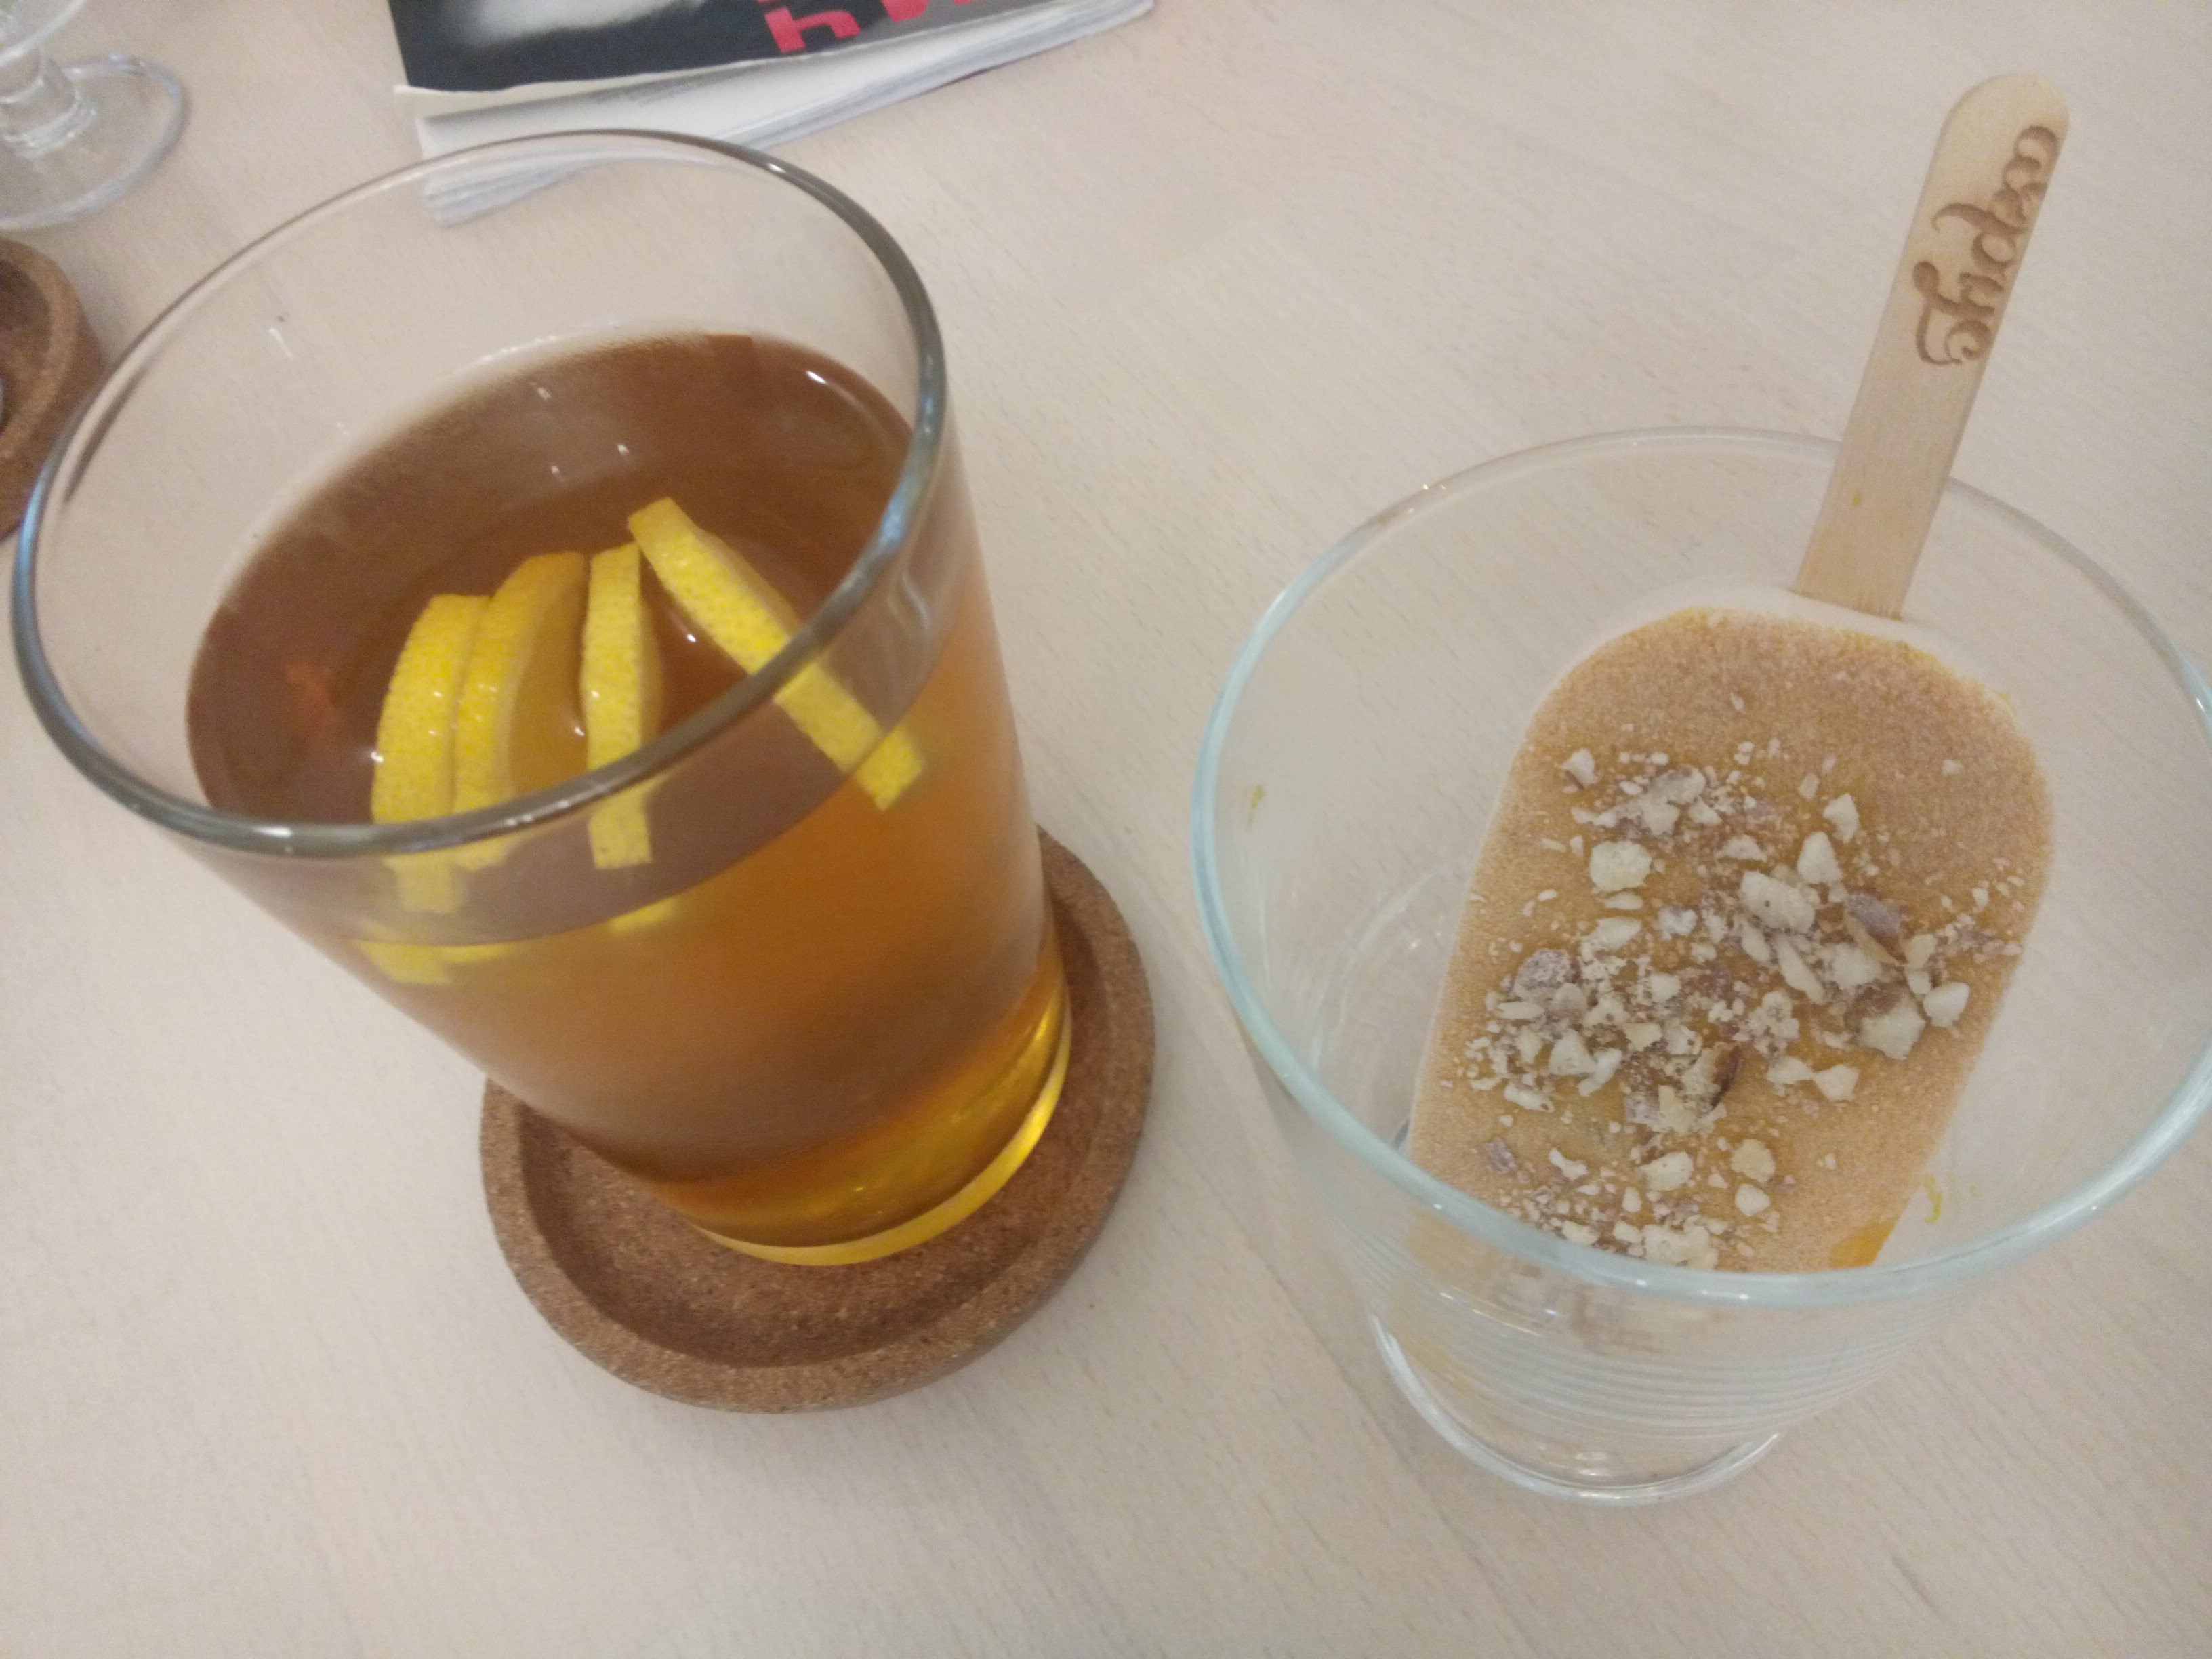 A tall glass containing golden tea and lemon slices next to an apricot popsicle covered in chopped nuts